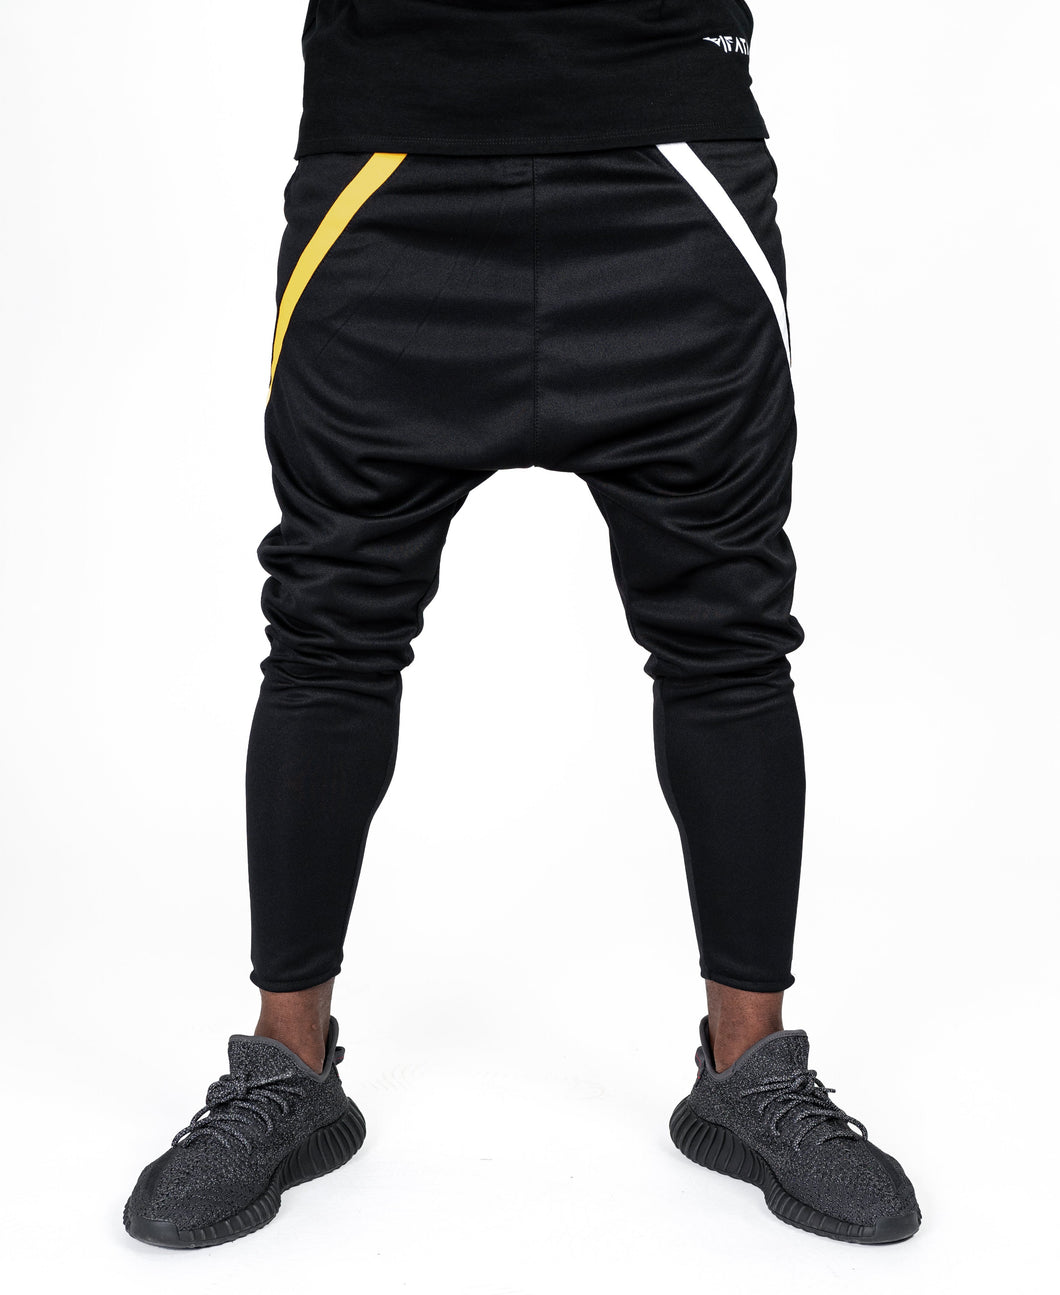 Black trousers with white and yellow design - Fatai Style